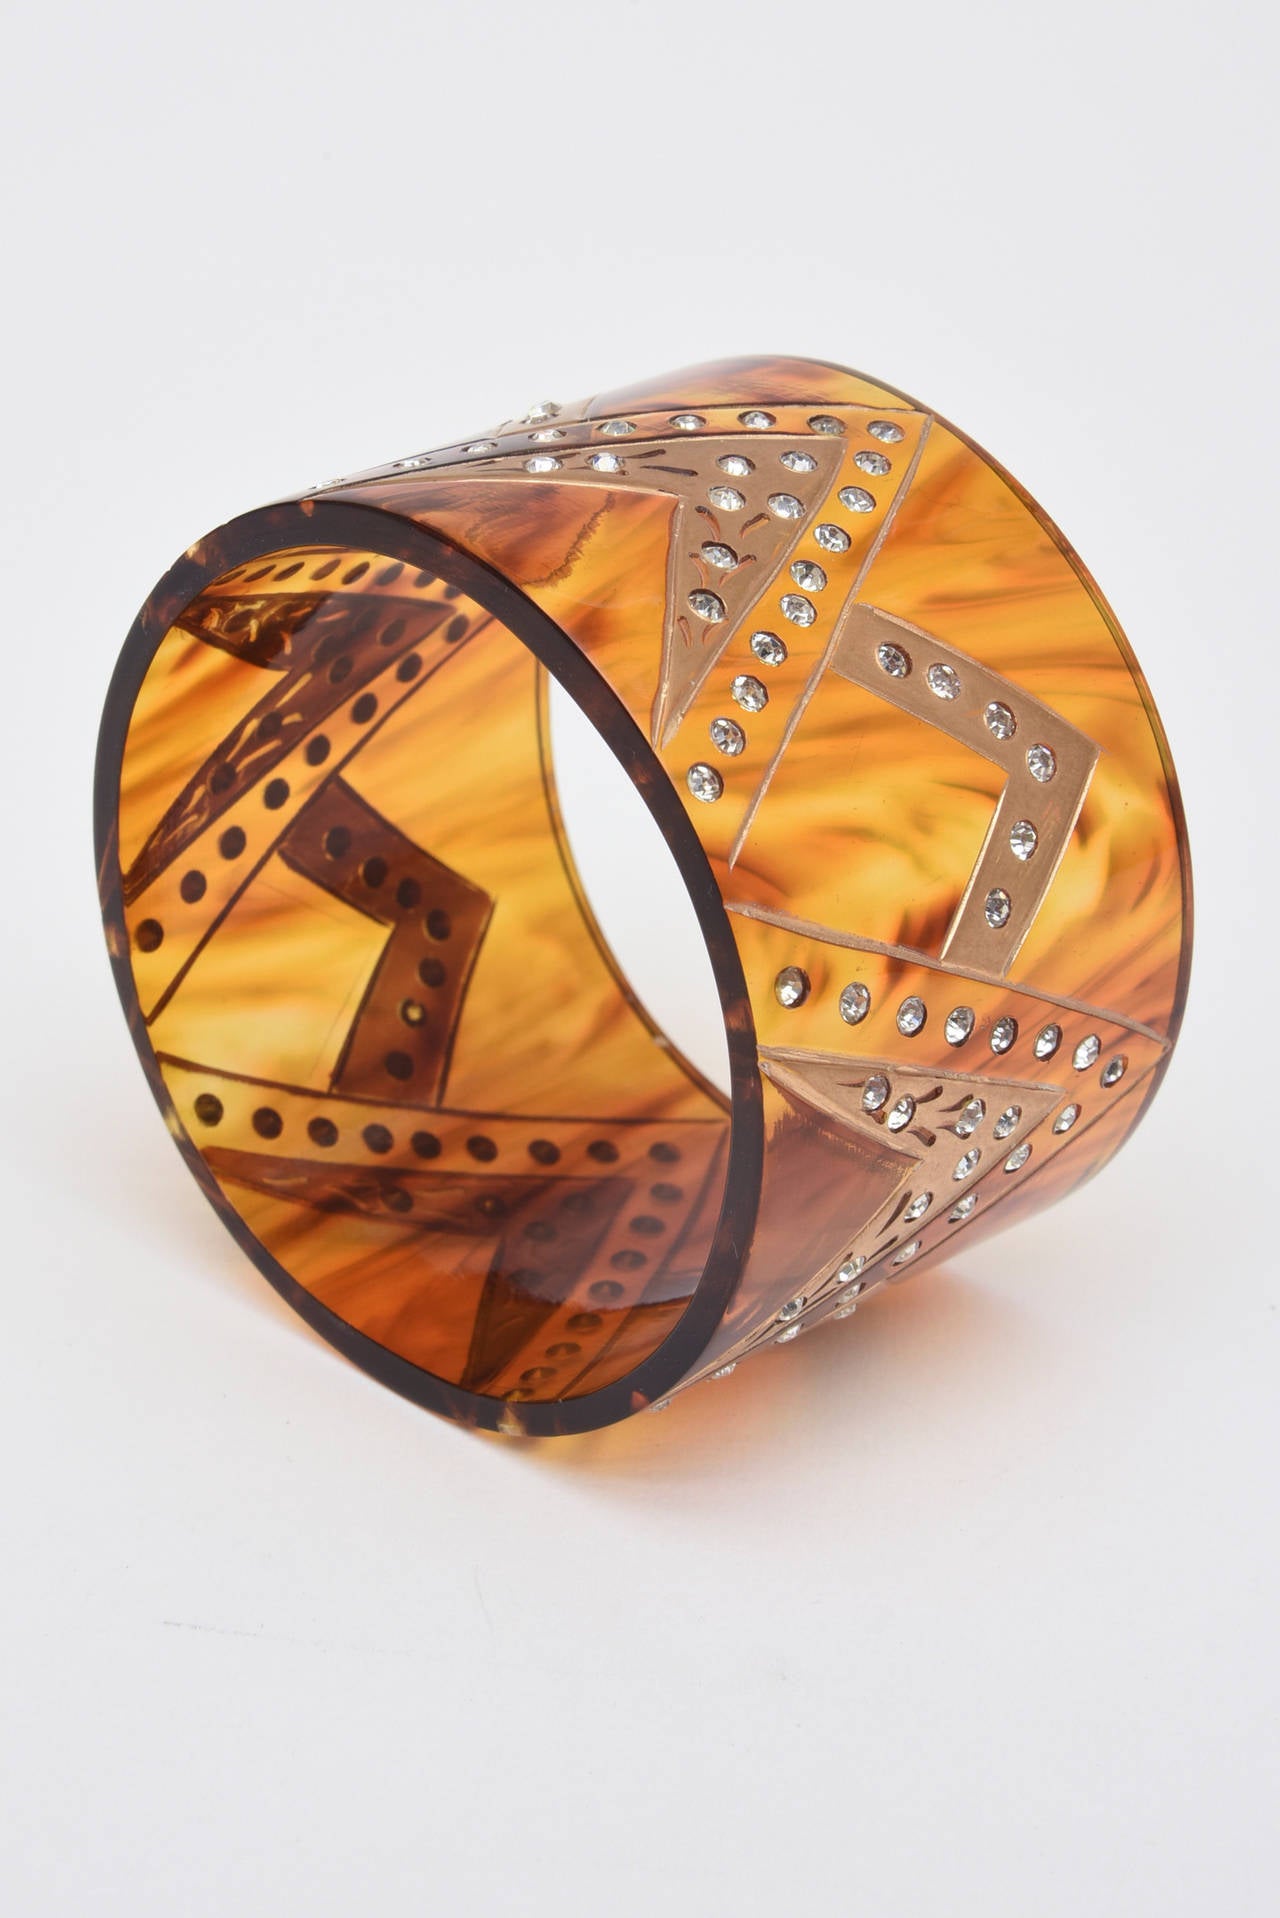 This French wide cuff bracelet has inverted V's  with gold applied and rhinestones adorning the v patterns.. It is amber colored tortoise resin. It has an Art Deco look but from the 80's. The interior of the cuff is 2.5 Inches. This is perfect for